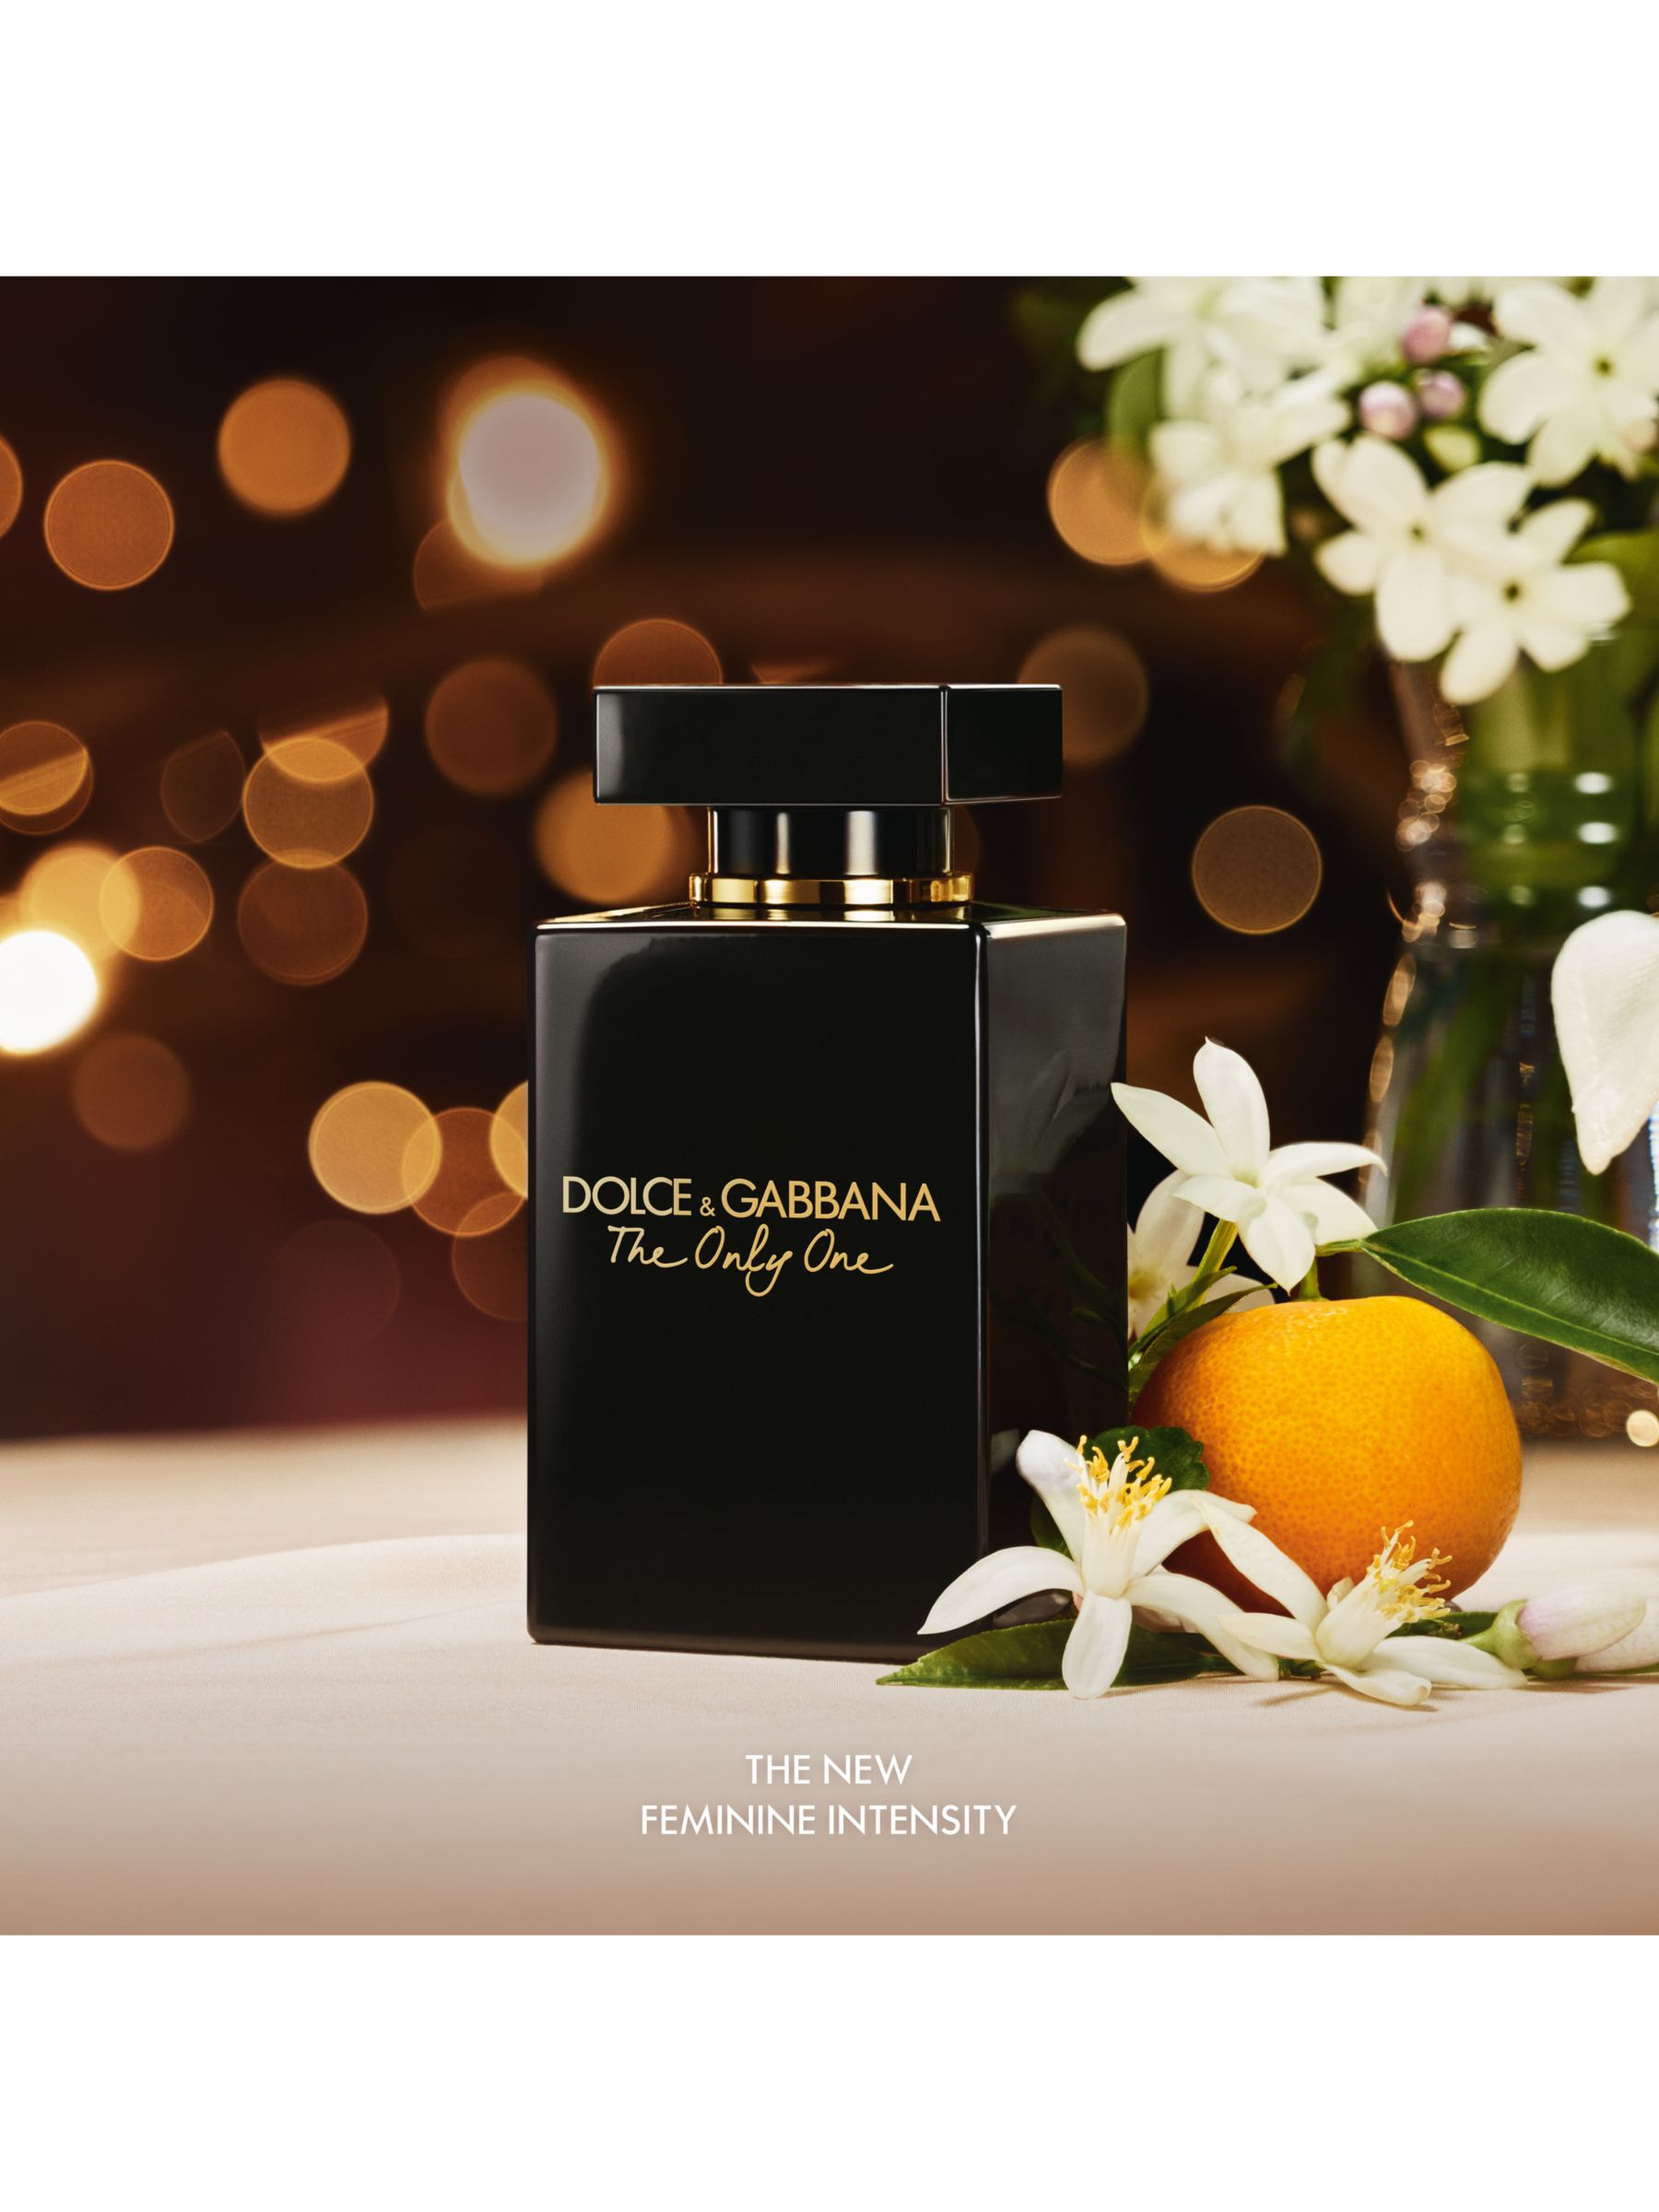 dolce and gabbana the only one mens